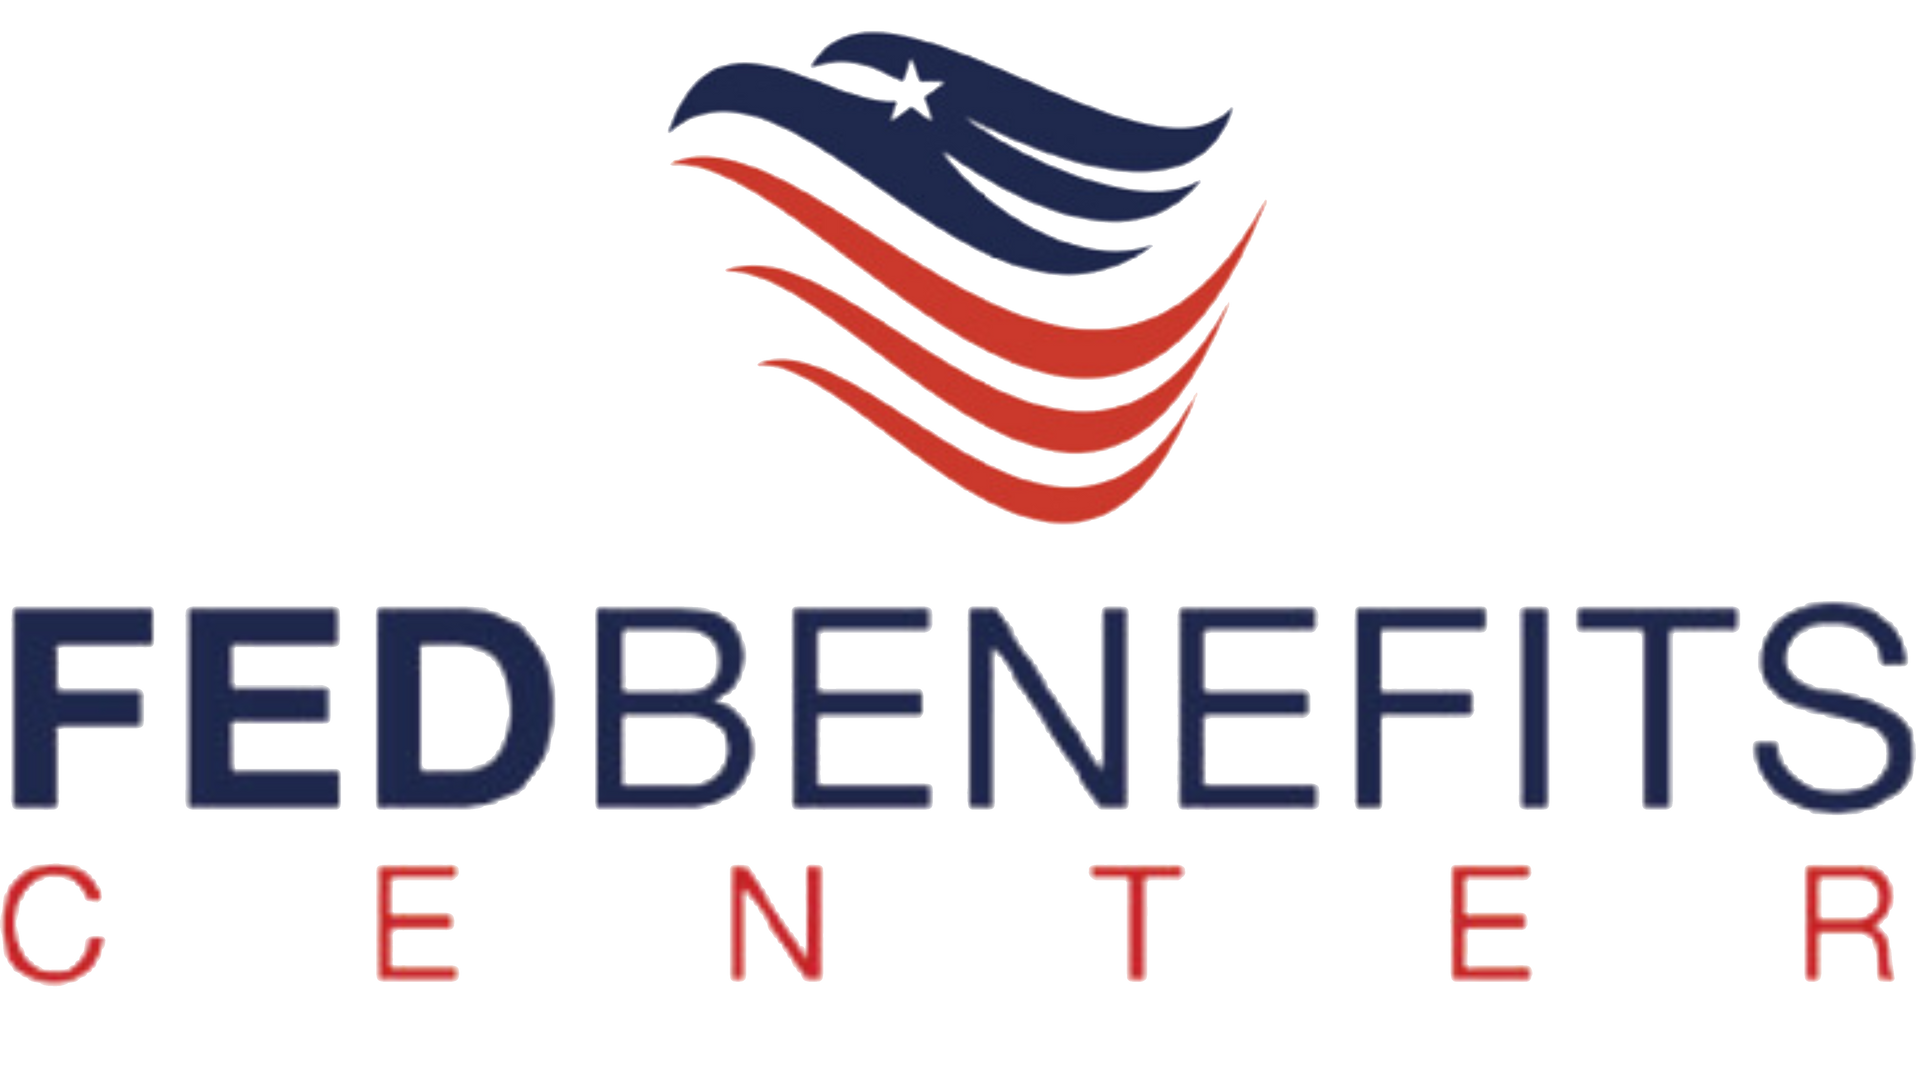 The fed benefits center logo has an american flag on it.